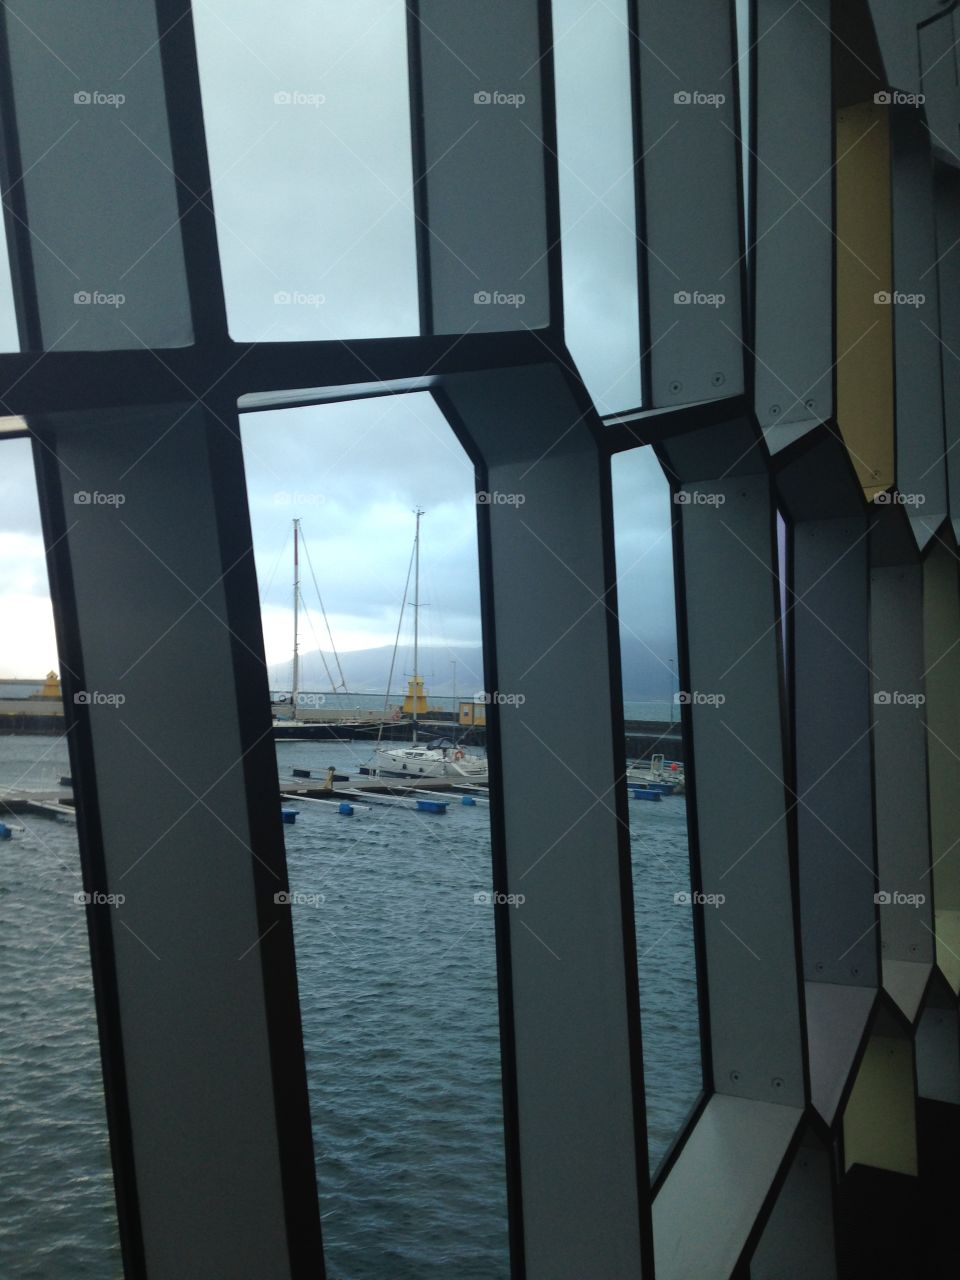 Water views from inside the Harpa concert hall 